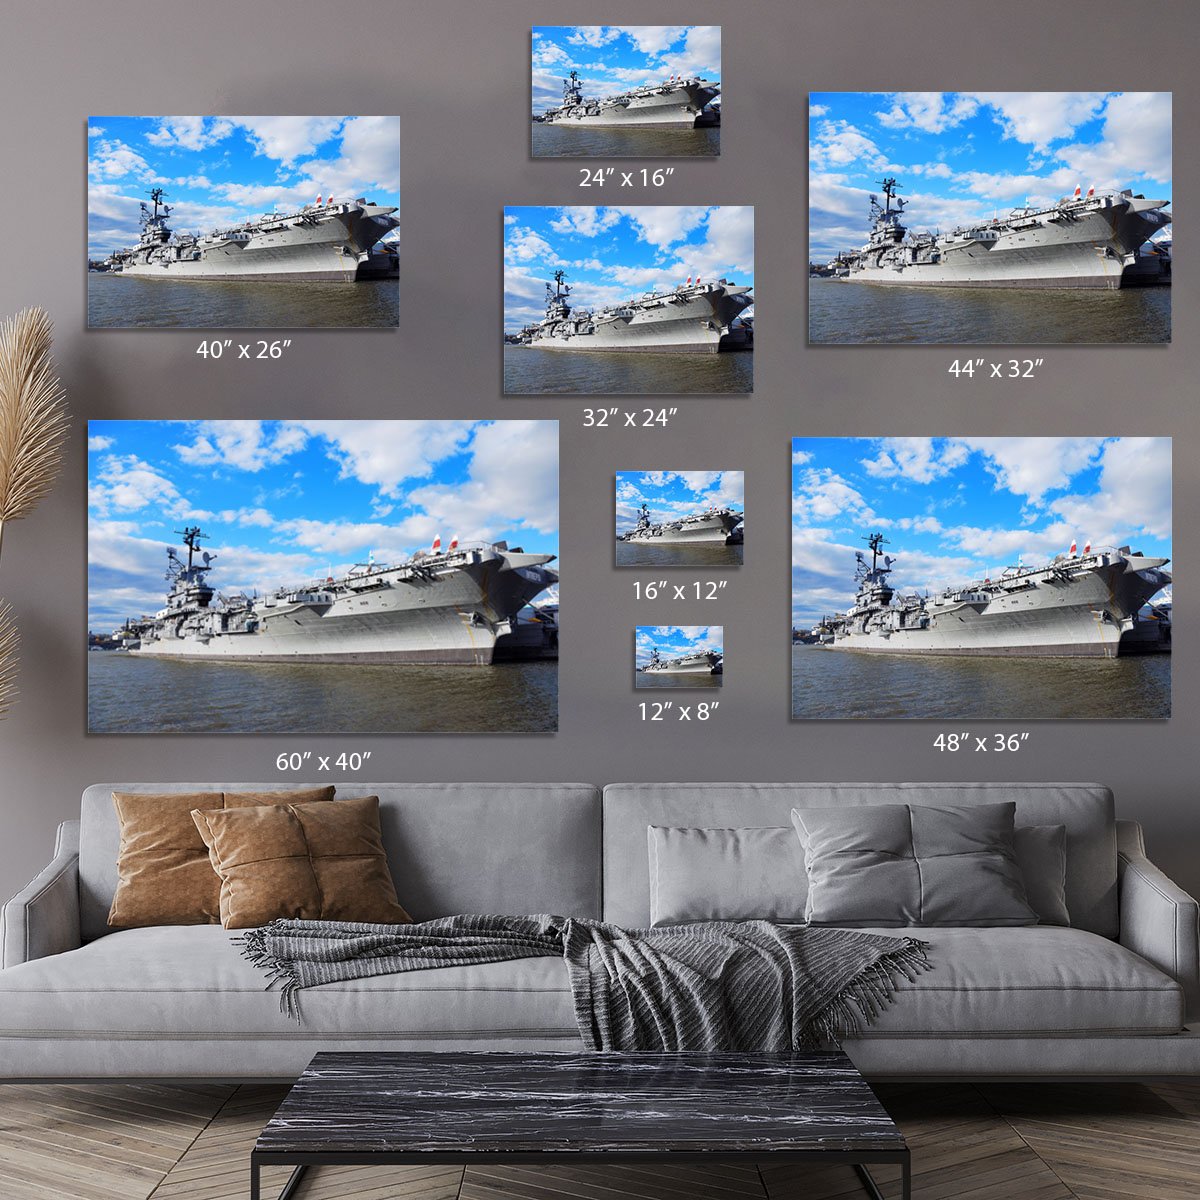 aircraft carriers built during World War II Canvas Print or Poster